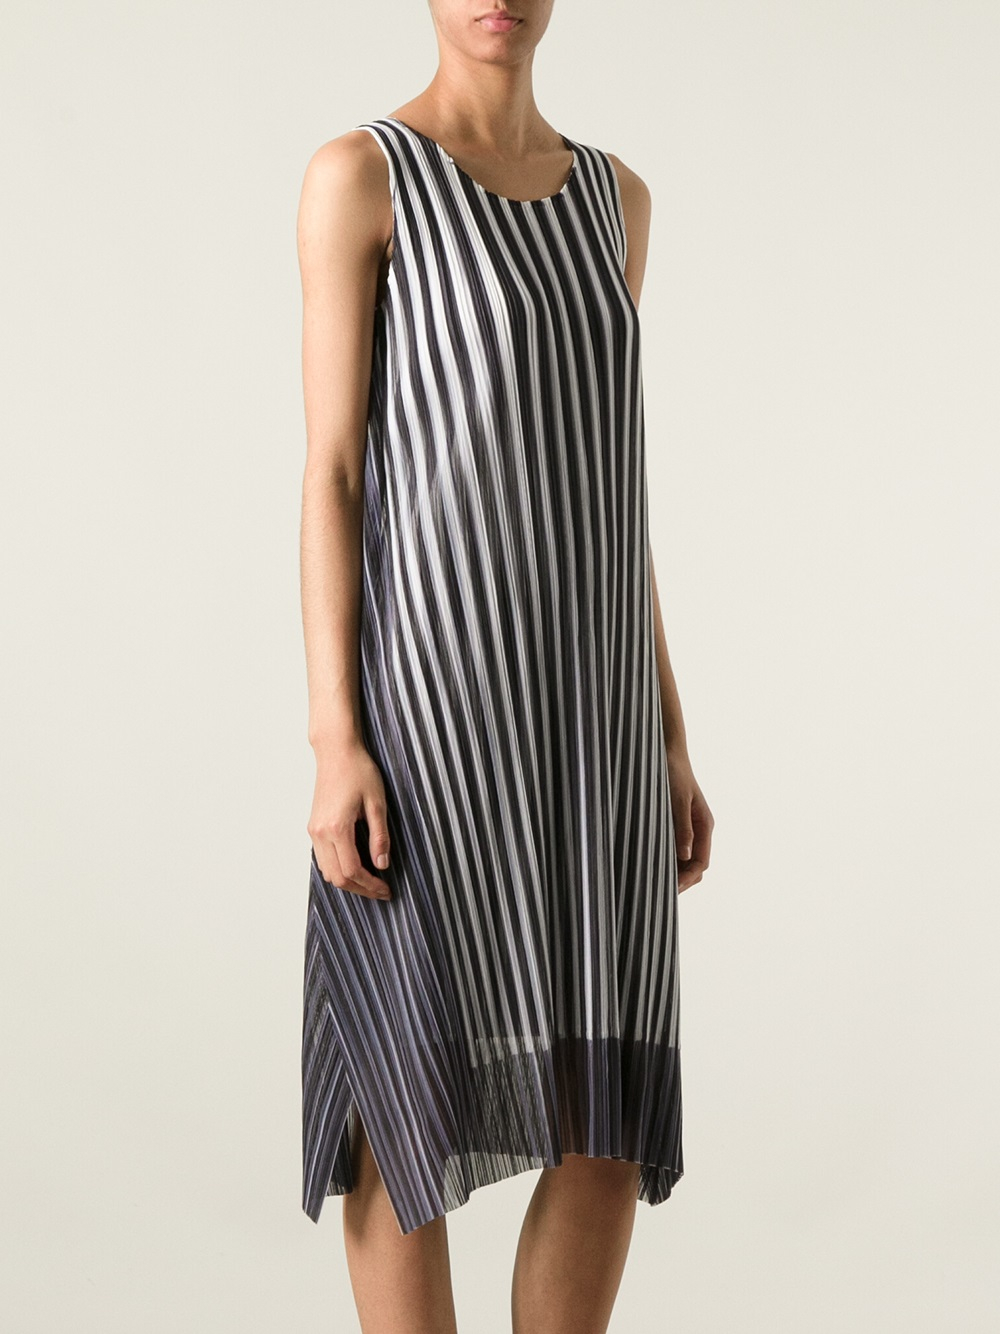 Lyst - Pleats Please Issey Miyake Layered Pleated Dress in Black